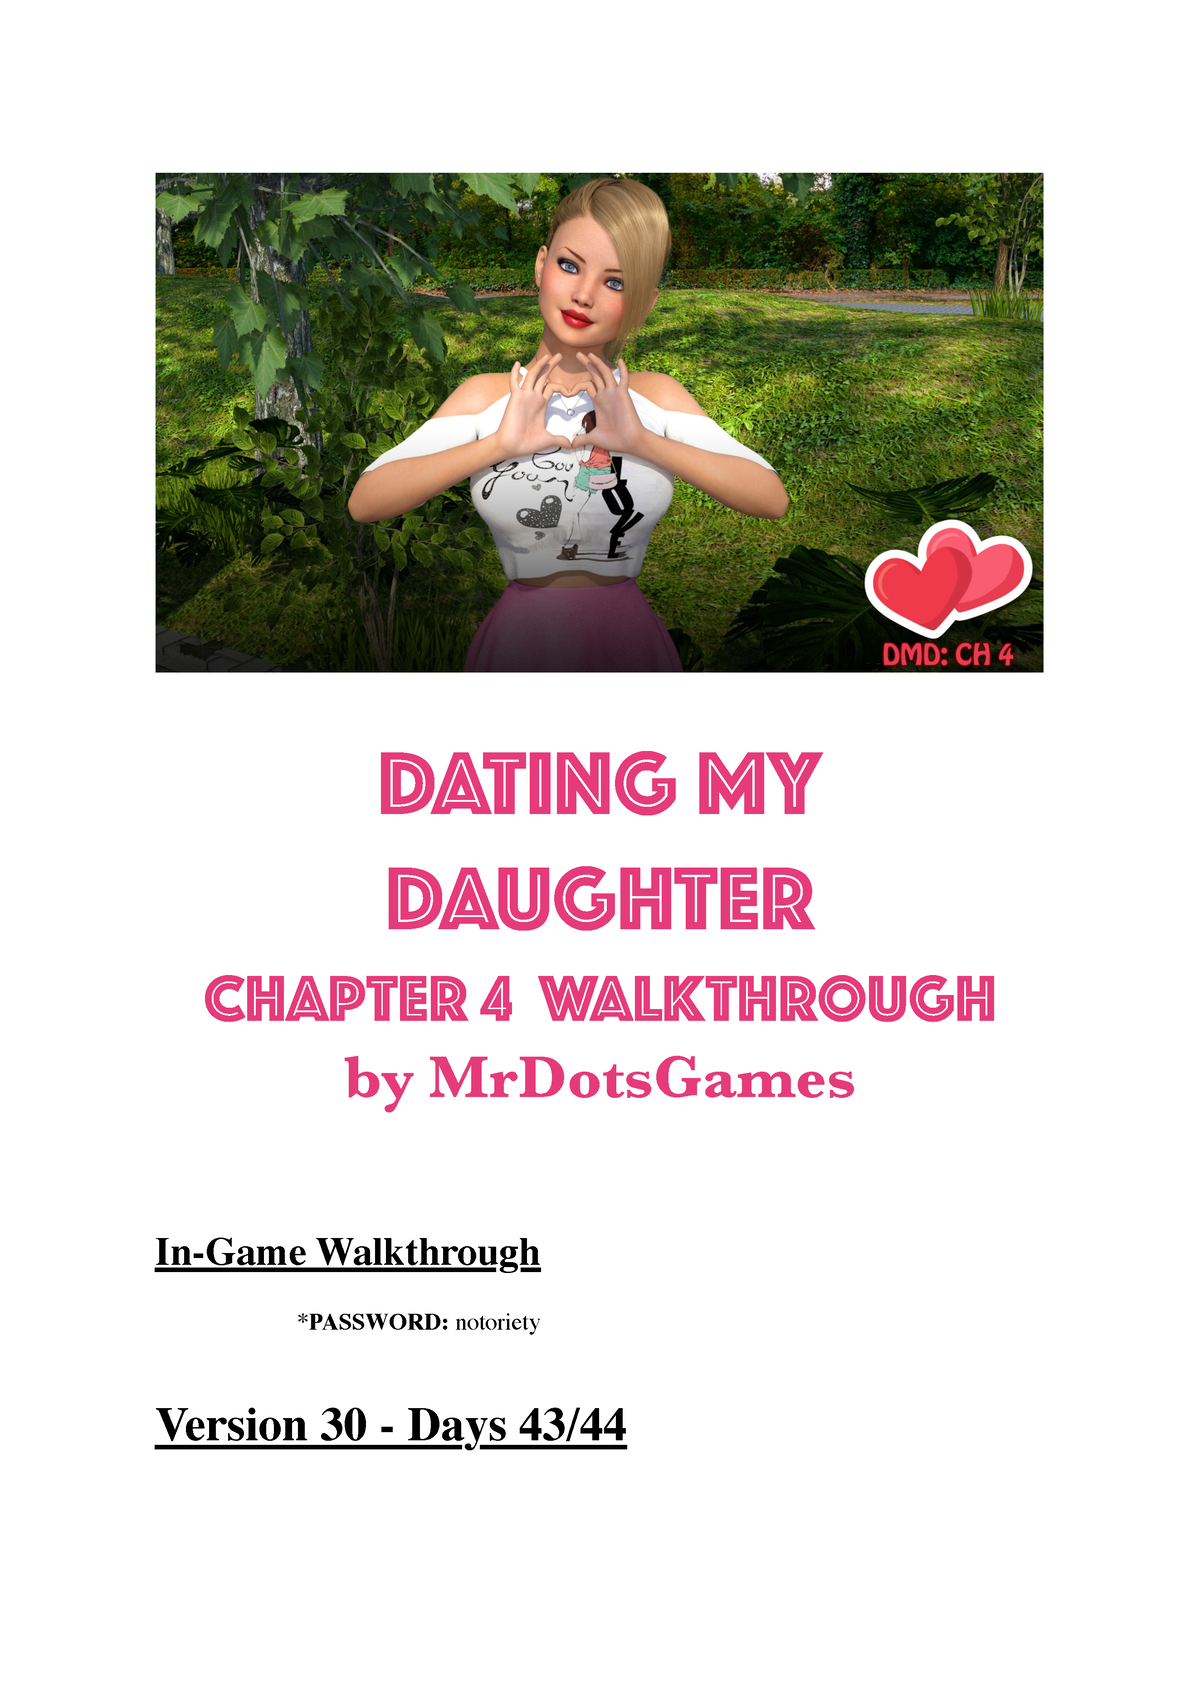 dmd-walkthrough-ch4-sfgag-dating-my-daughter-chapter-4-walkthrough-by-mrdotsgames-in-game